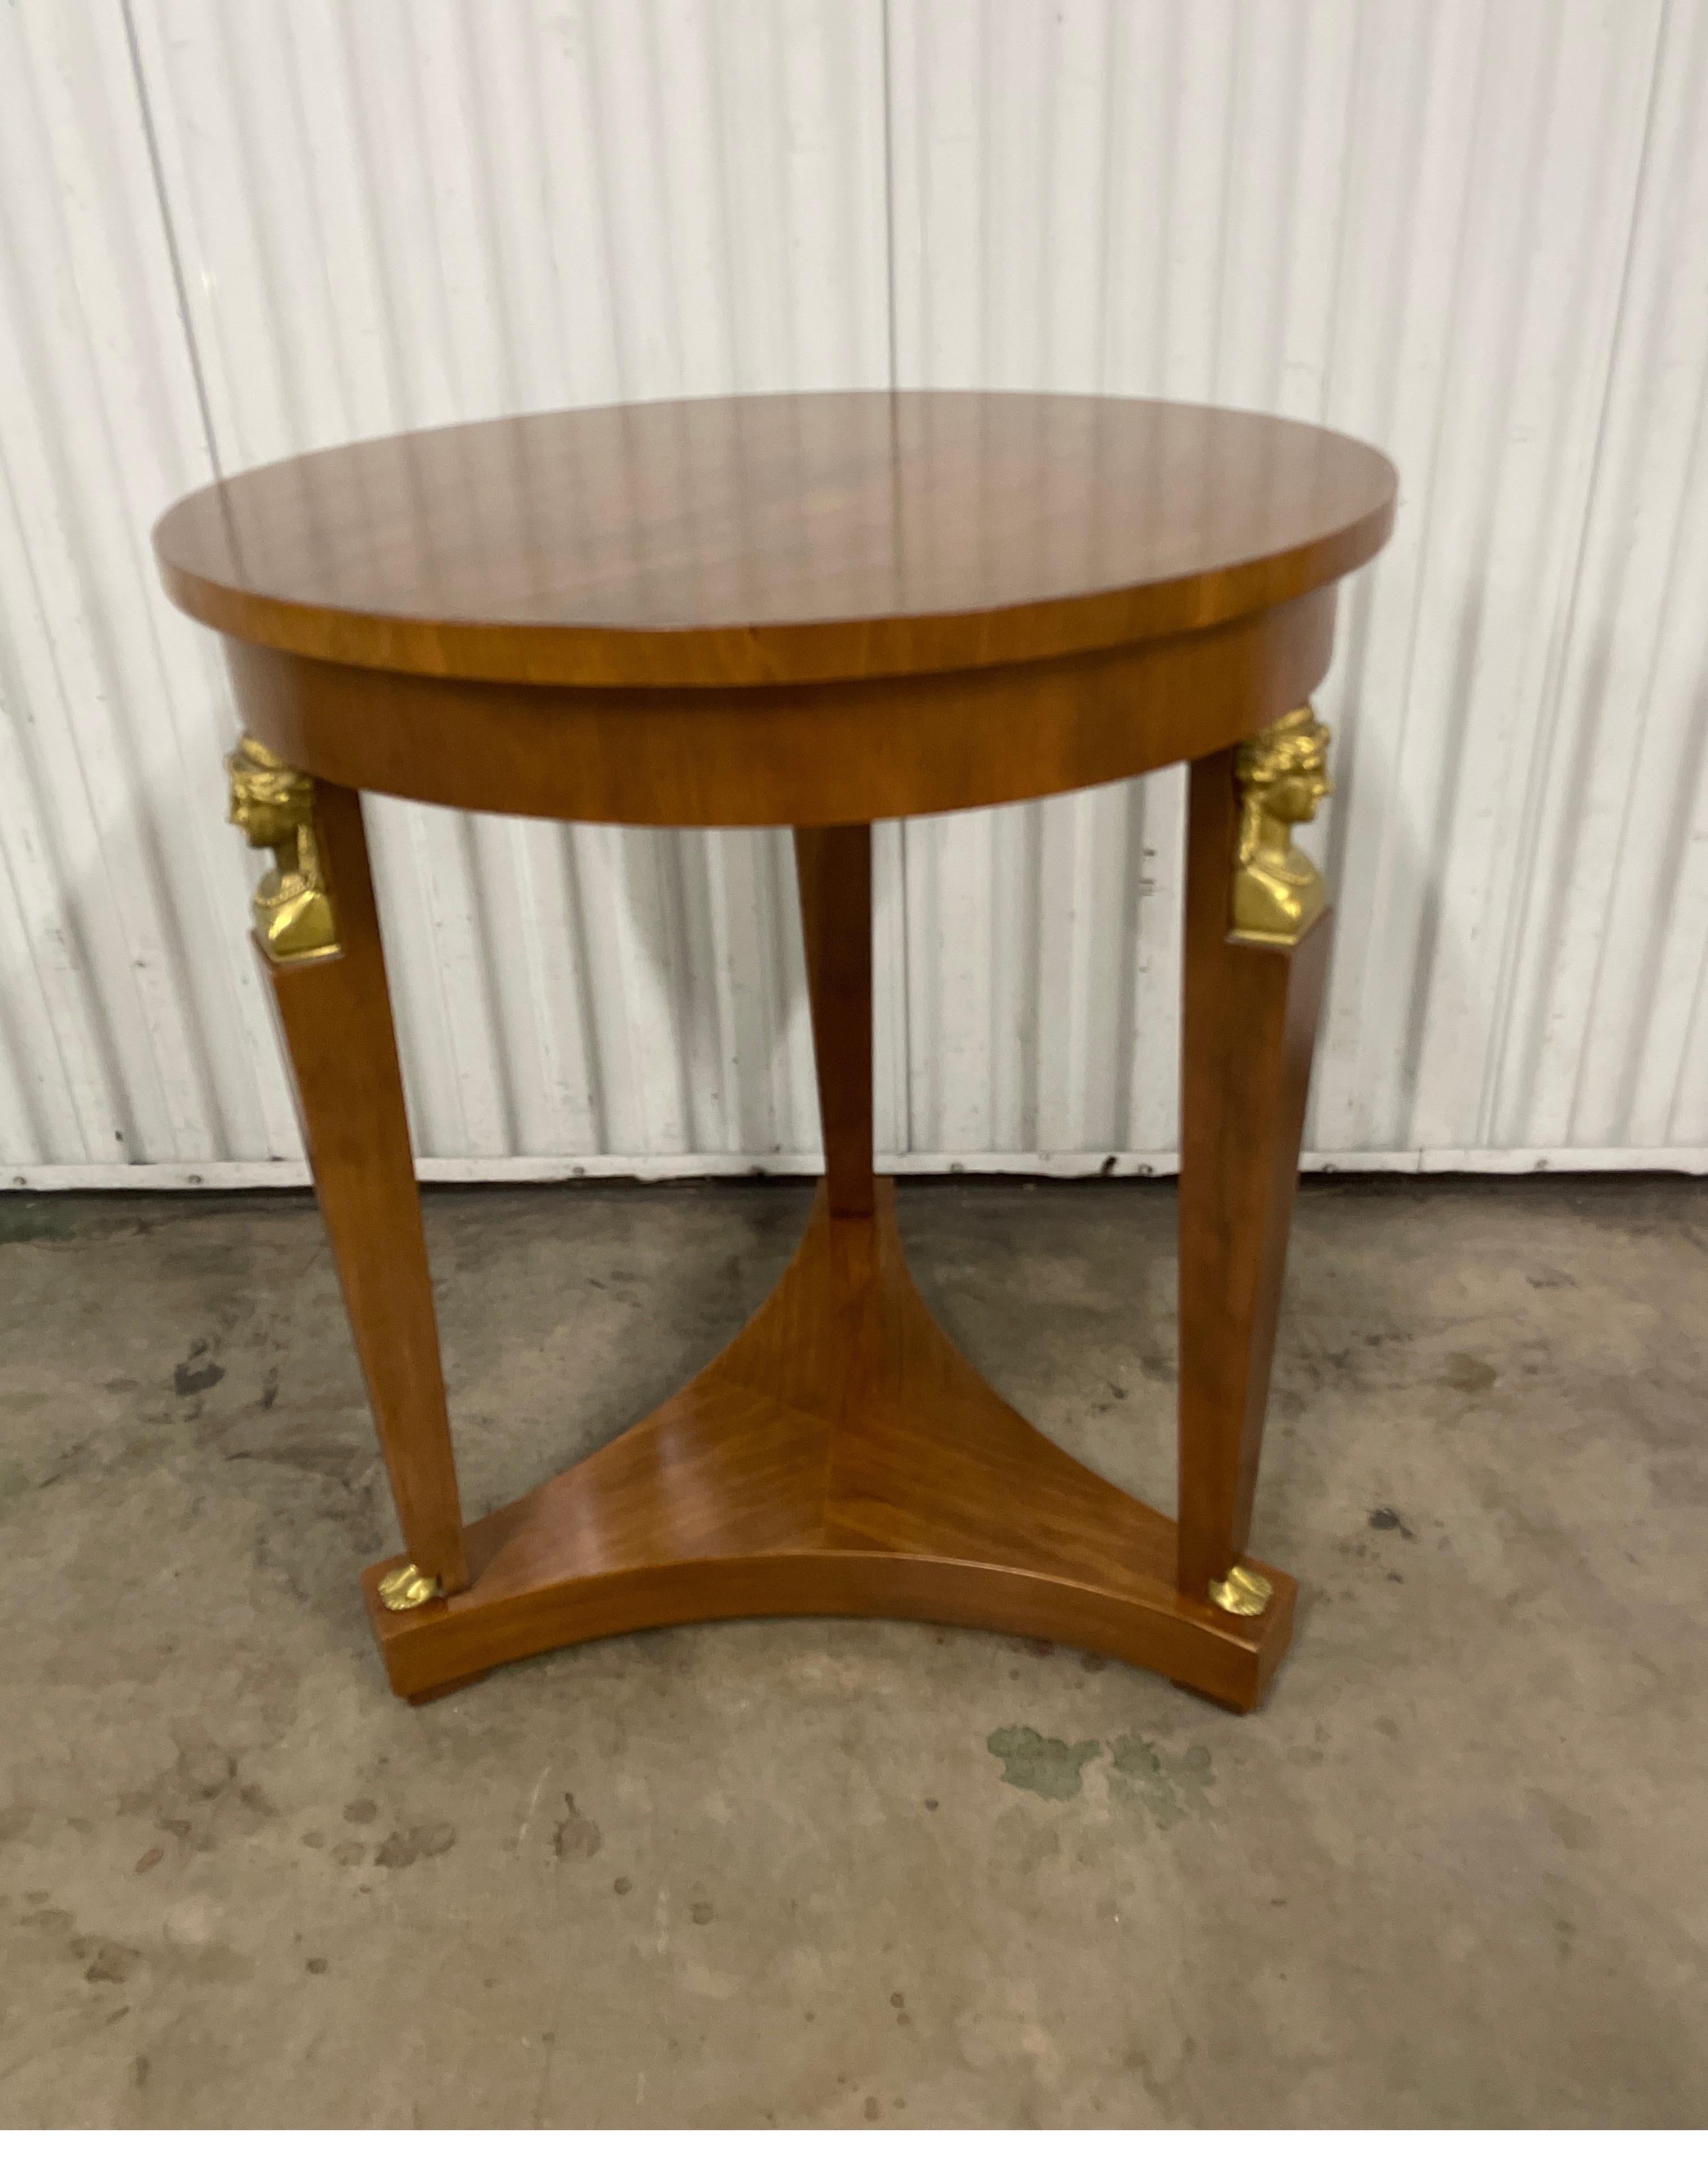 Vintage Neoclassical style round side table by Baker Furniture Company. This striking table has three legs attached with a bottom apron. Each leg has a brass face of sphinx at top and finished with a brass foot at base. A very classical and elegant